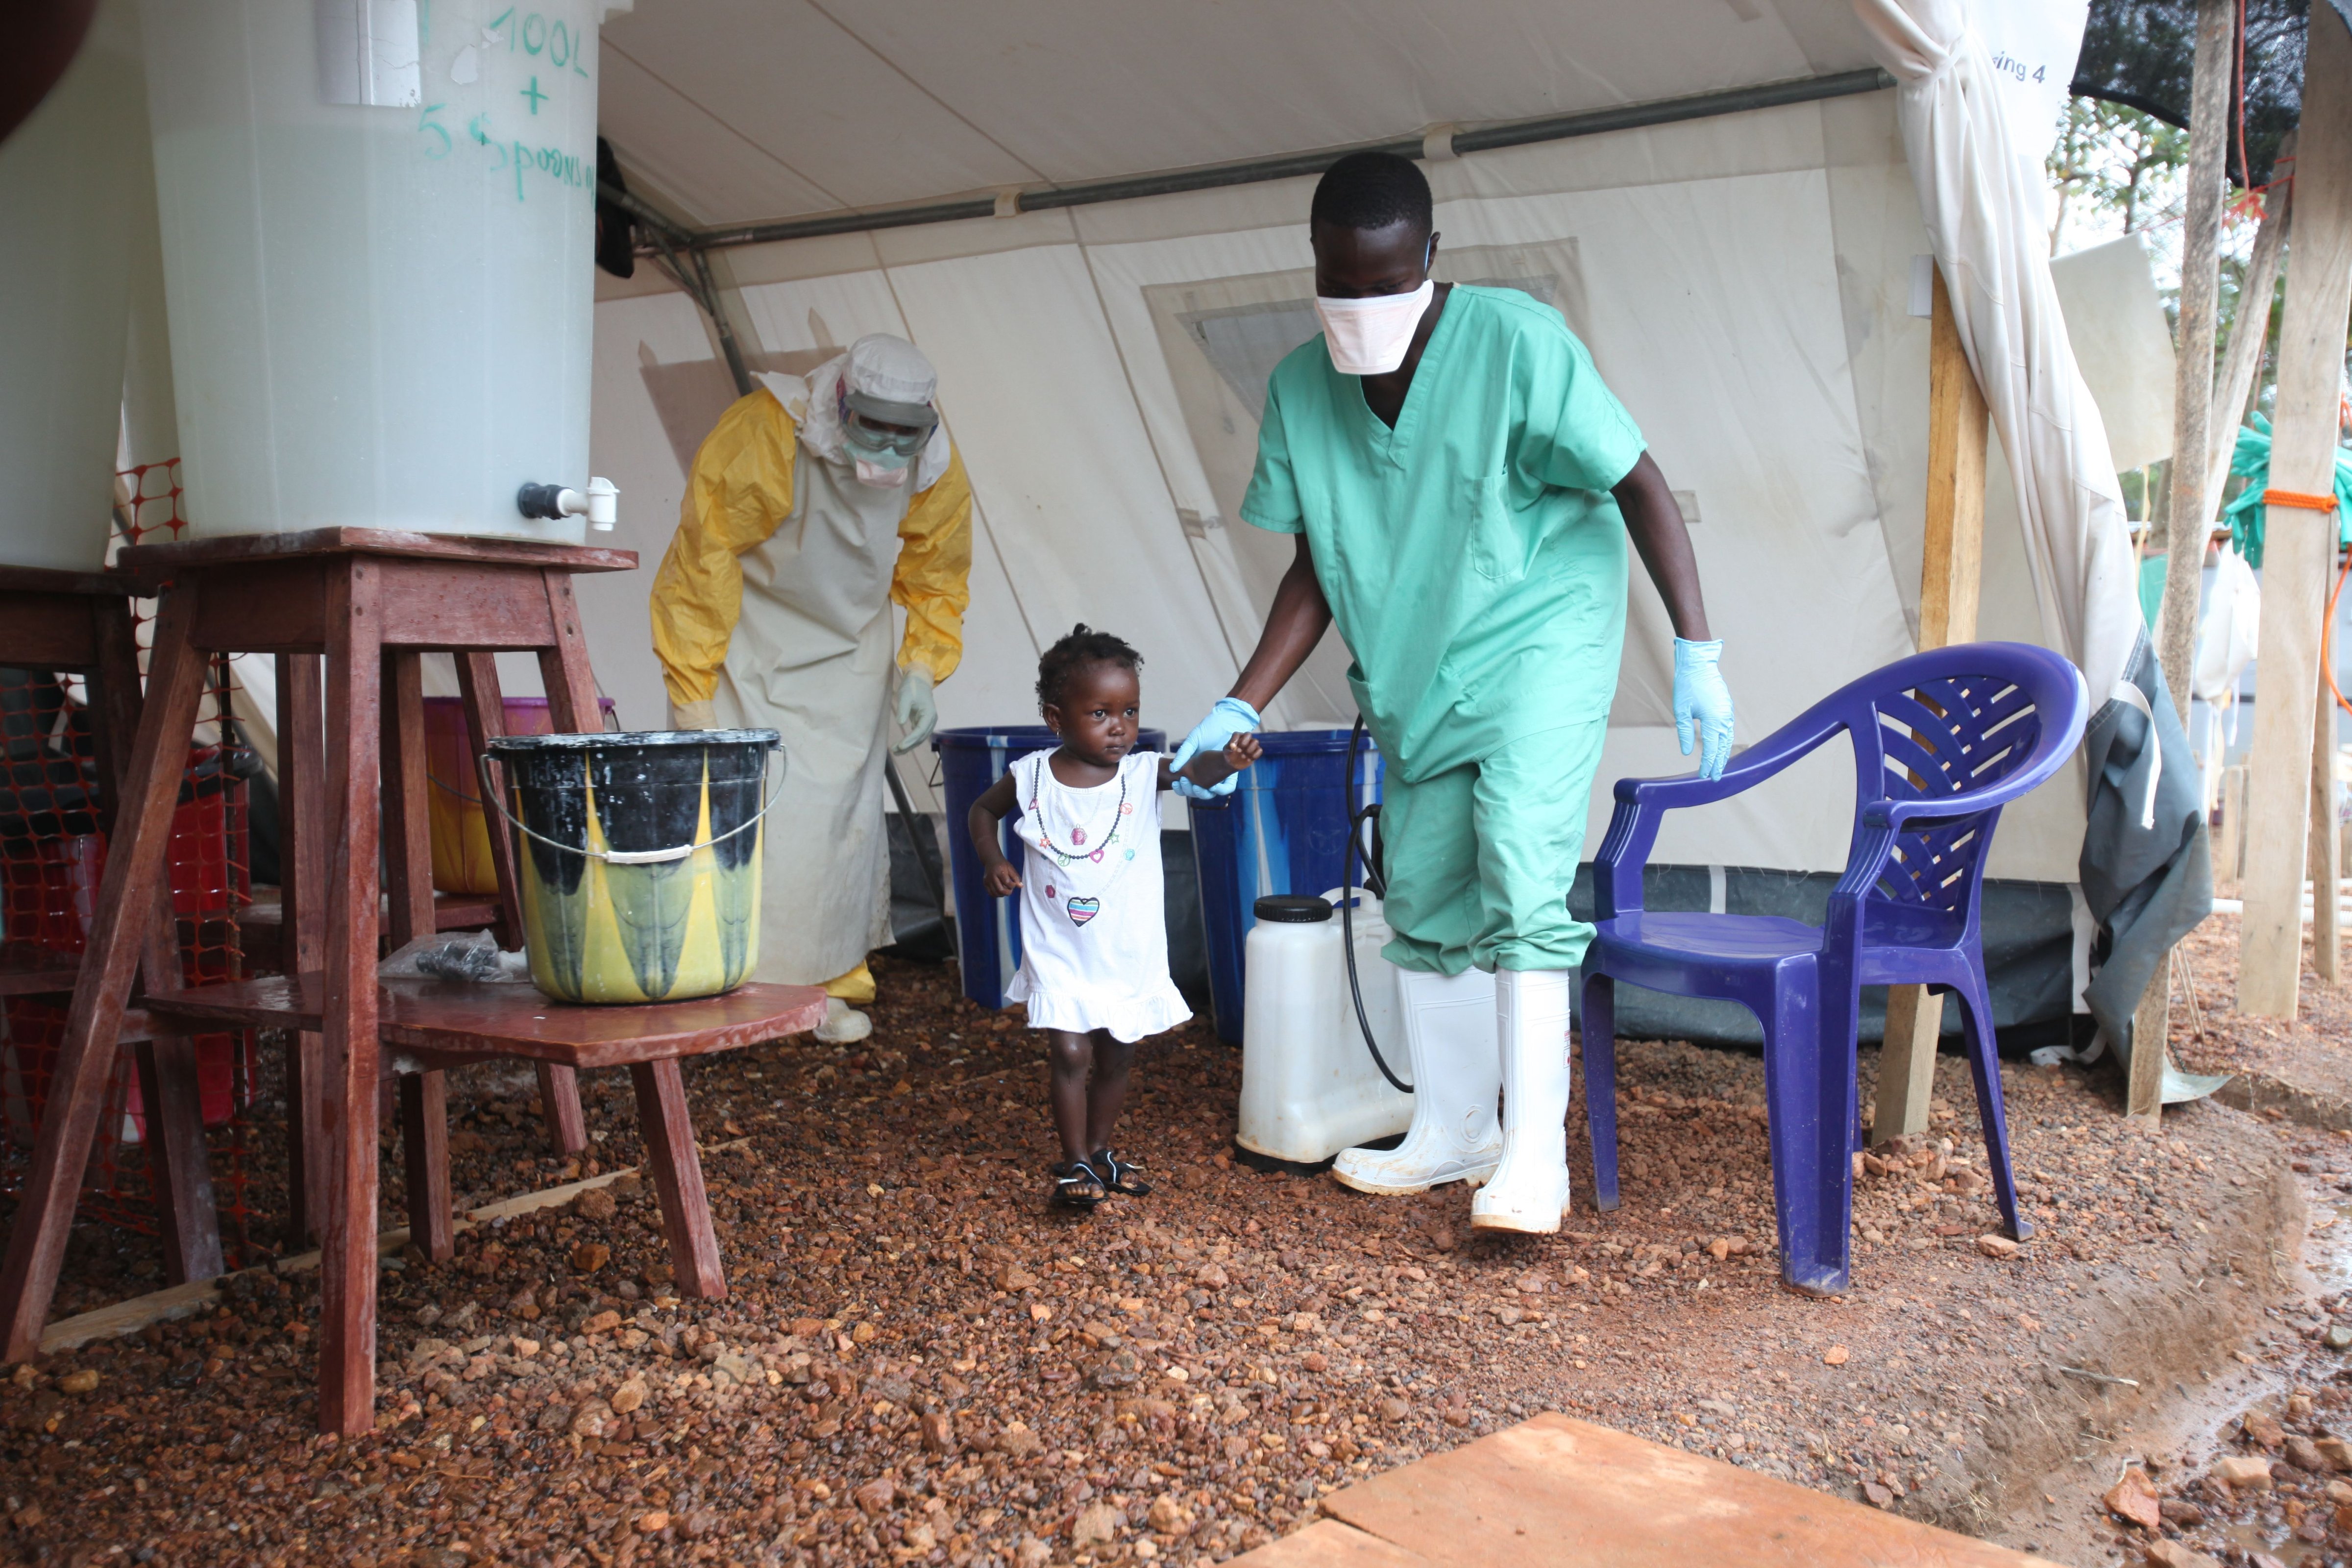 Isata, a 22-month-old, is the youngest patient to be discharged from the Ebola treatment centre in Kailahun district, Sierra Leone on Aug. 6, 2014. (Jennifer Yang—Toronto Star/Getty Images)